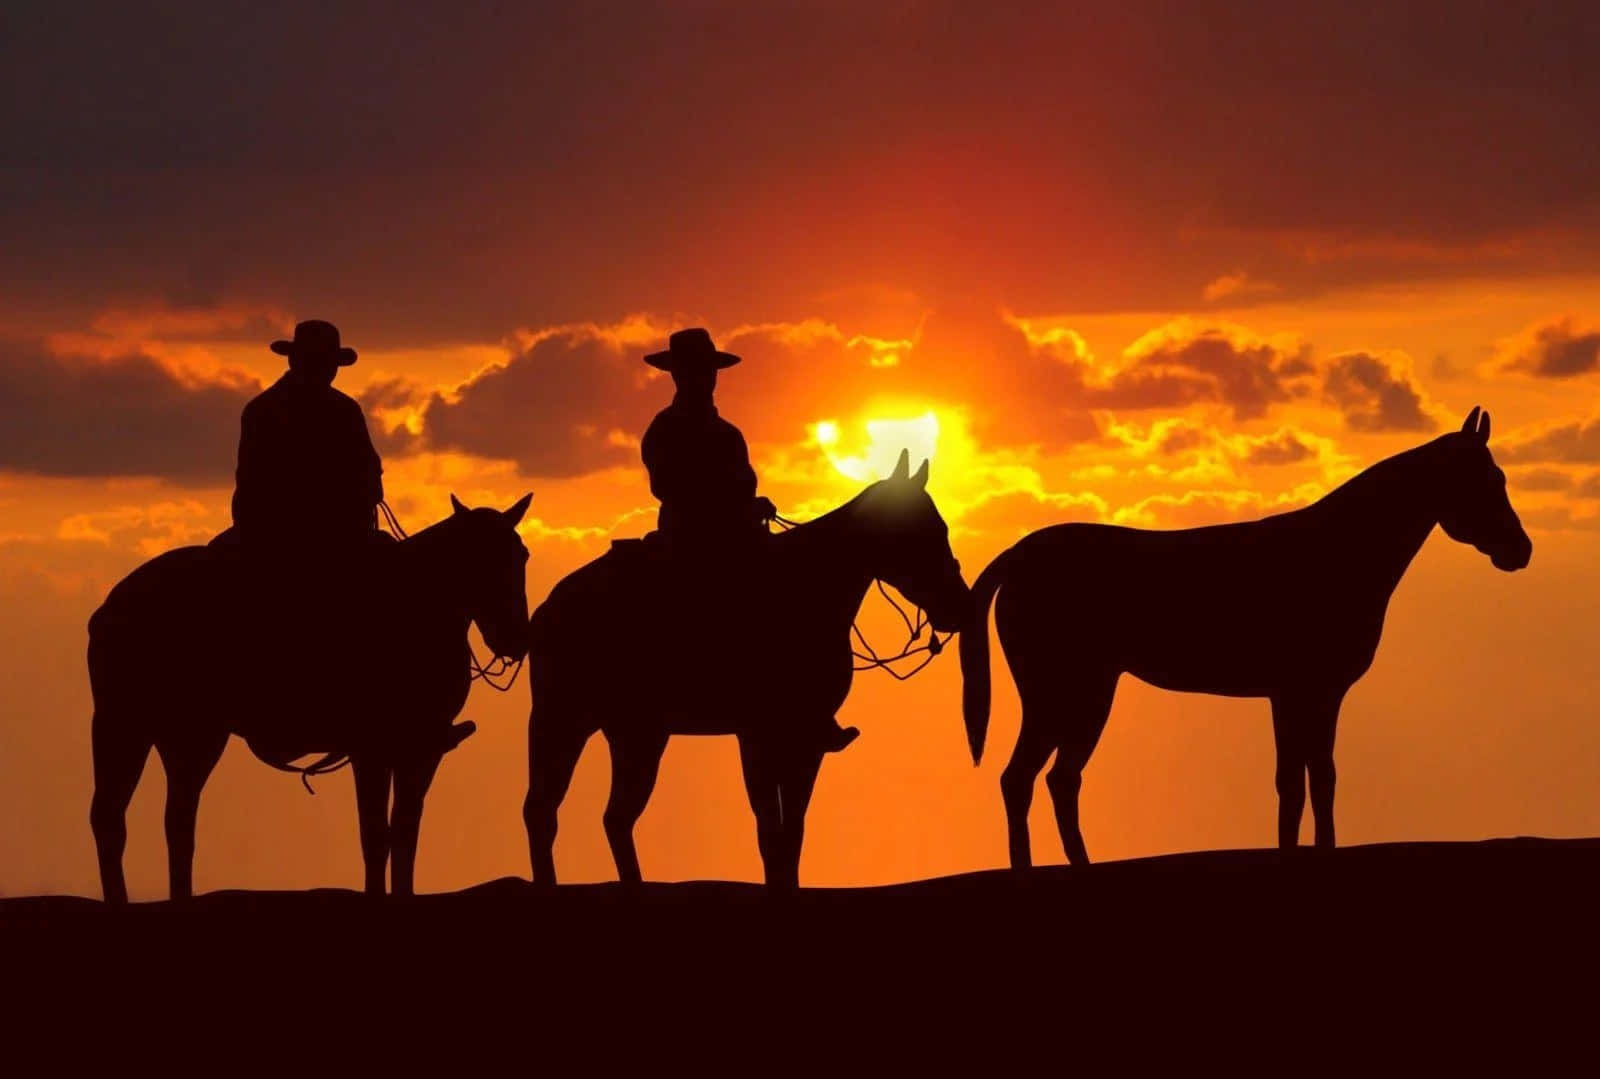 A Cowboy Cruising Into the Sunset